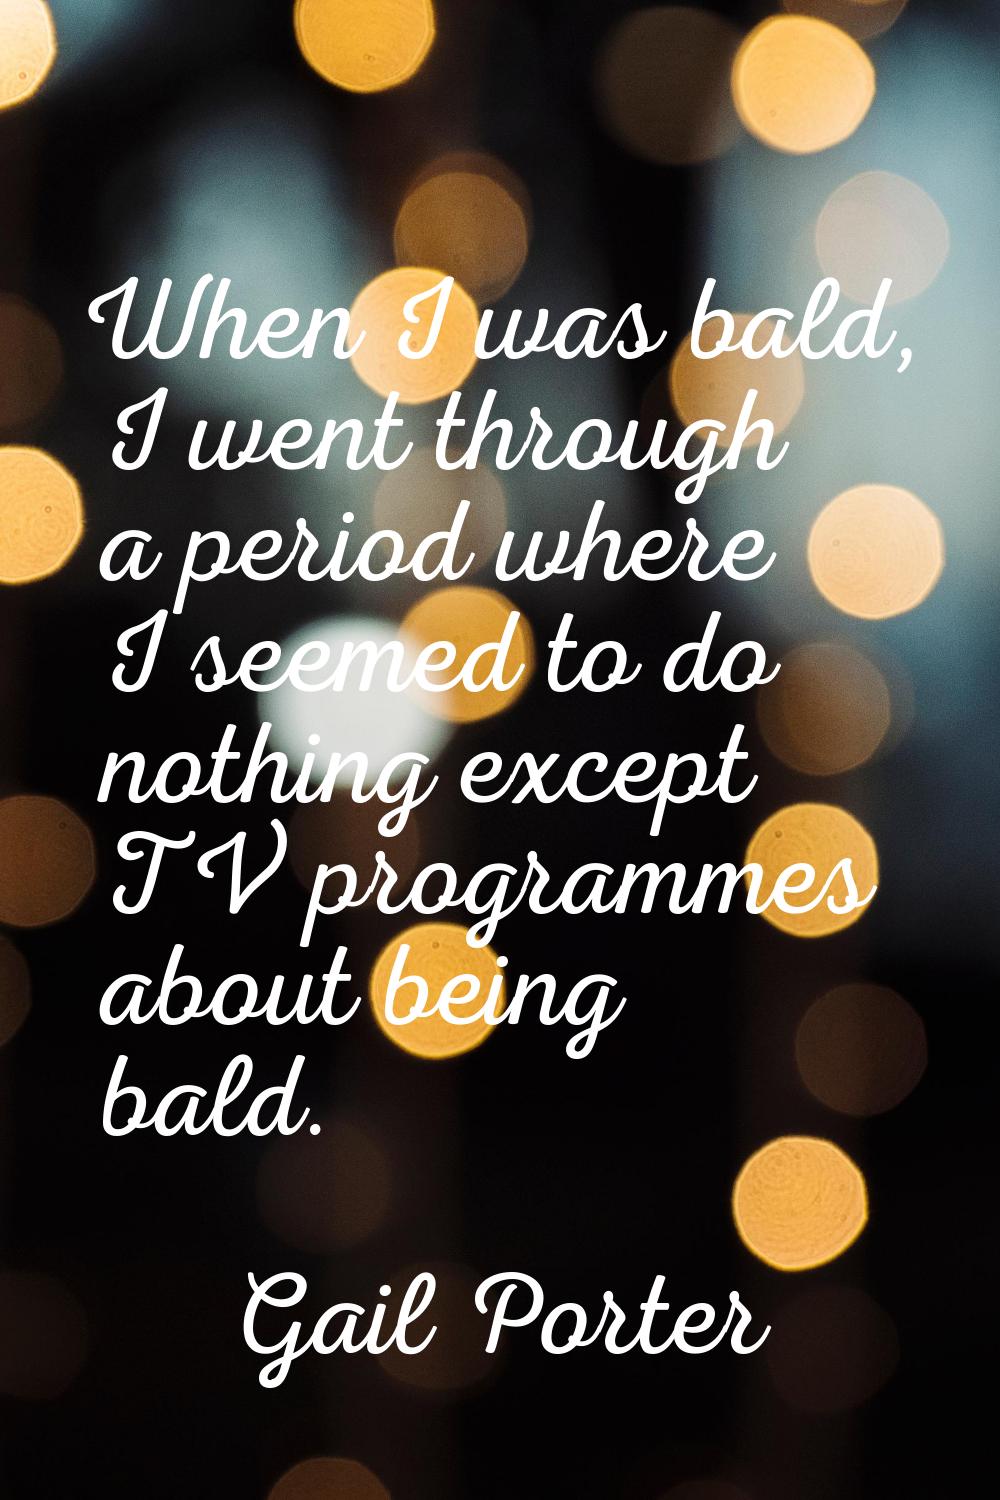 When I was bald, I went through a period where I seemed to do nothing except TV programmes about be